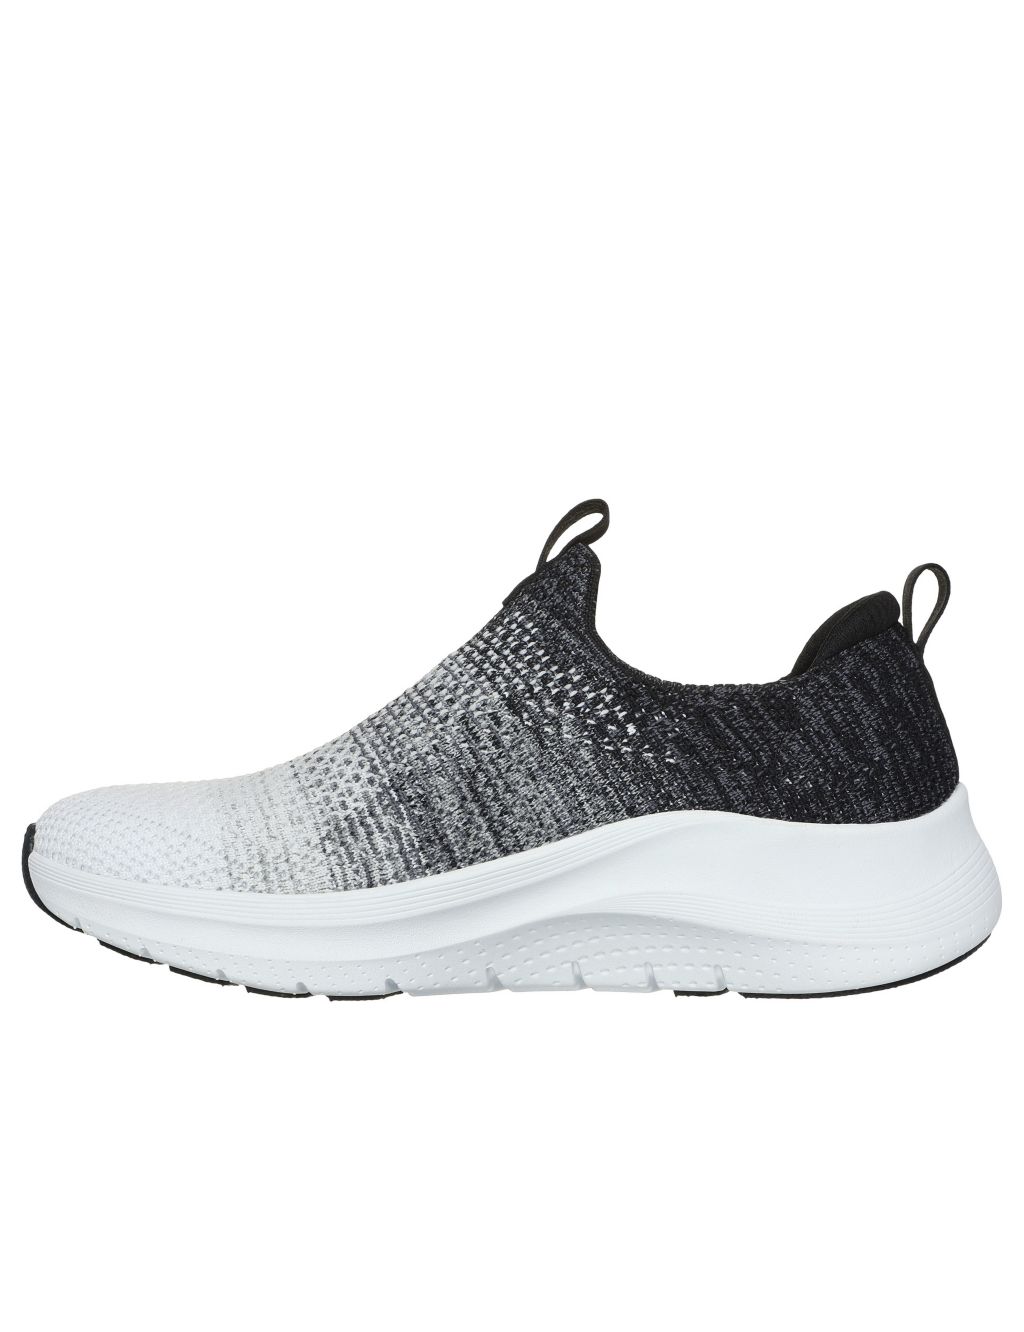 Arch Fit 2.0 Slip On Trainers image 3